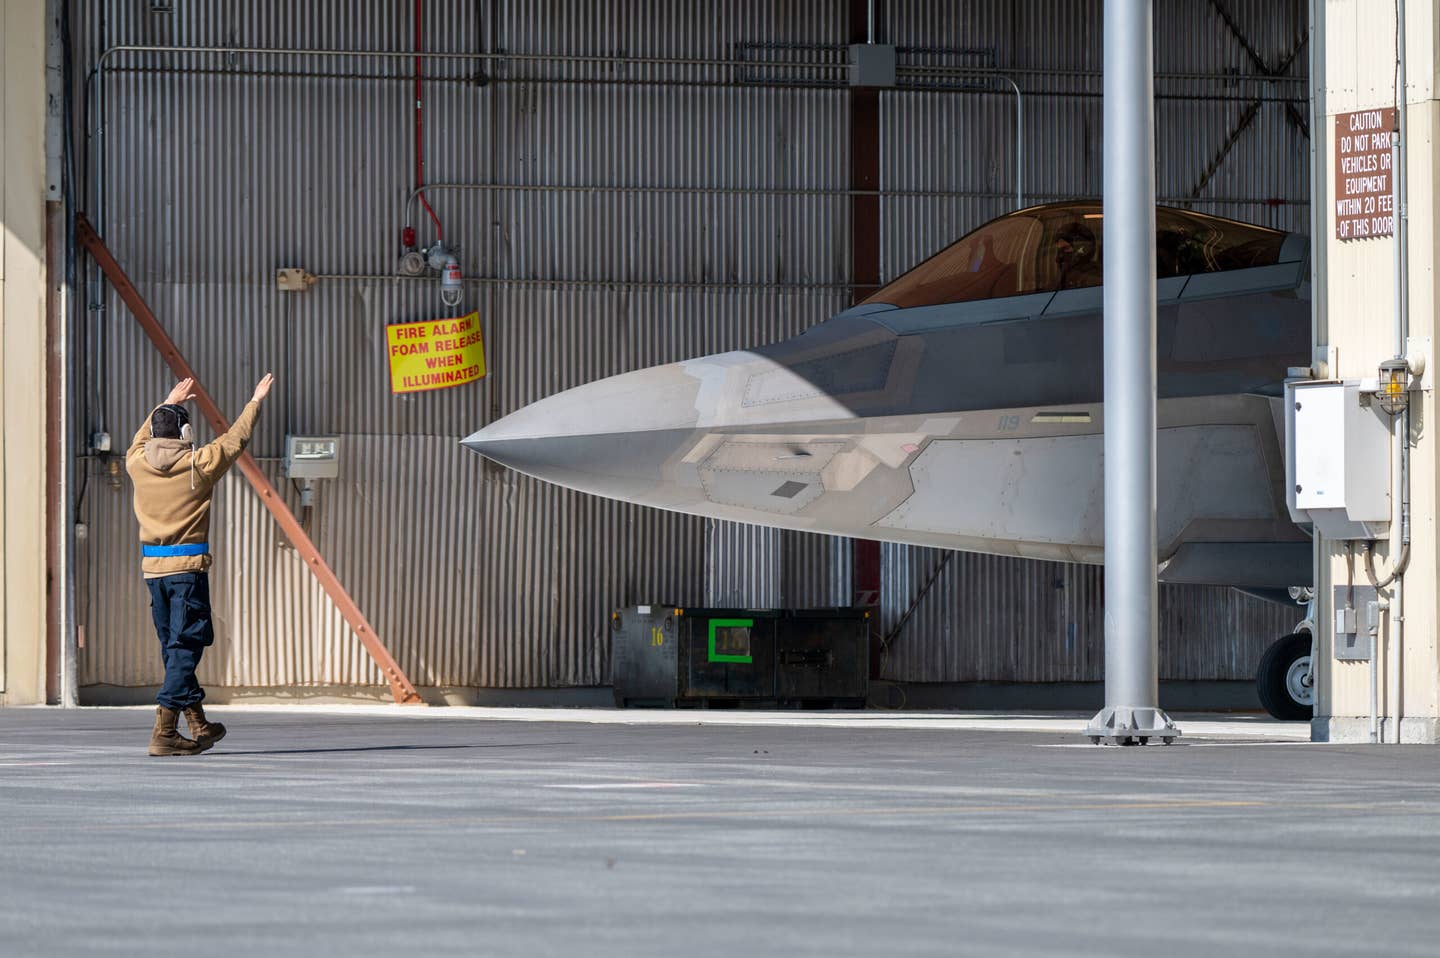 A U.S. Air Force Airman assigned to the 3rd Wing marshals an F-22 Raptor out of its hangar before a sortie with U.S. Air Force F-15 Eagles assigned to the California Air National Guard’s 144th Fighter Wing at Joint Base Elmendorf-Richardson, Alaska, April 18, 2022. The Eagles deployed to Alaska to improve interoperability with JBER Raptor’s real-world alert mission. (U.S. Air Force photo by Airman 1st Class Andrew Britten)